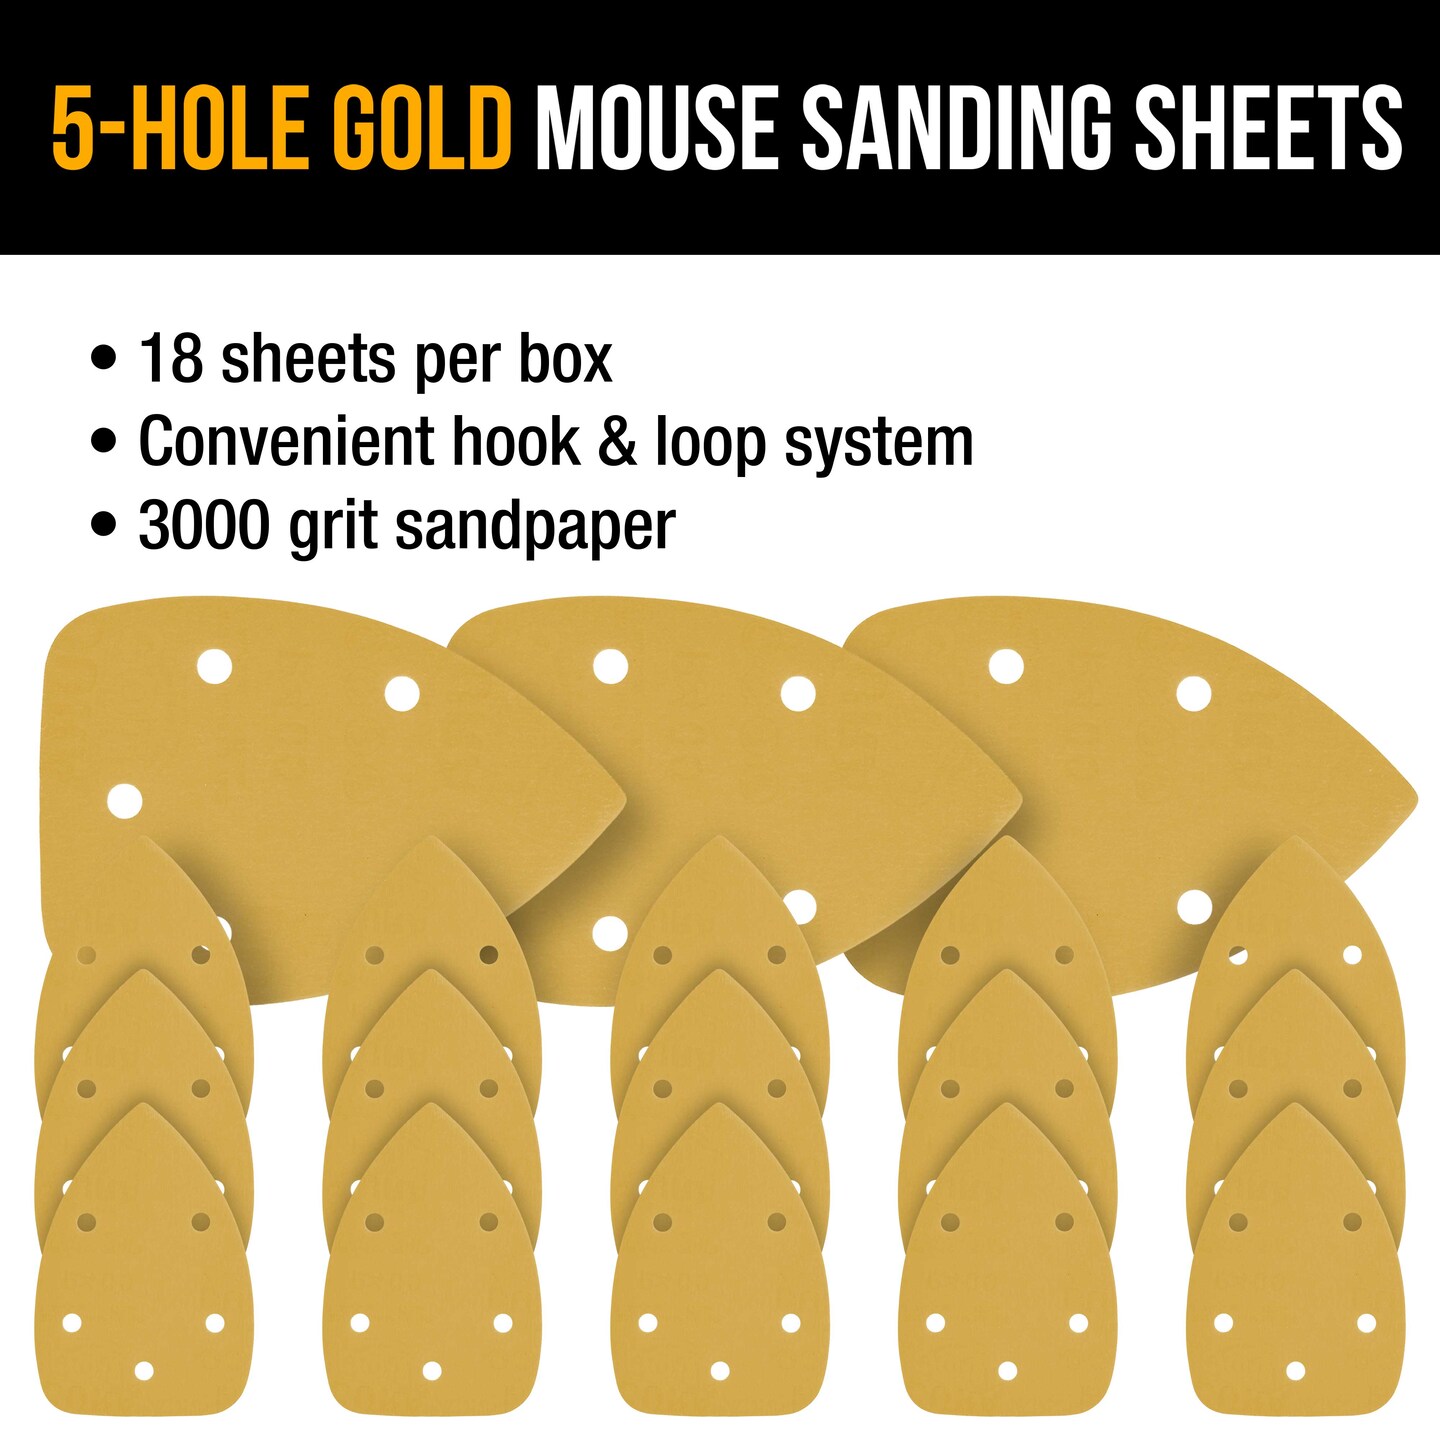 3000 Grit - 5-Hole Pattern Hook &#x26; Loop Sanding Sheets for Mouse Sanders - Box of 18